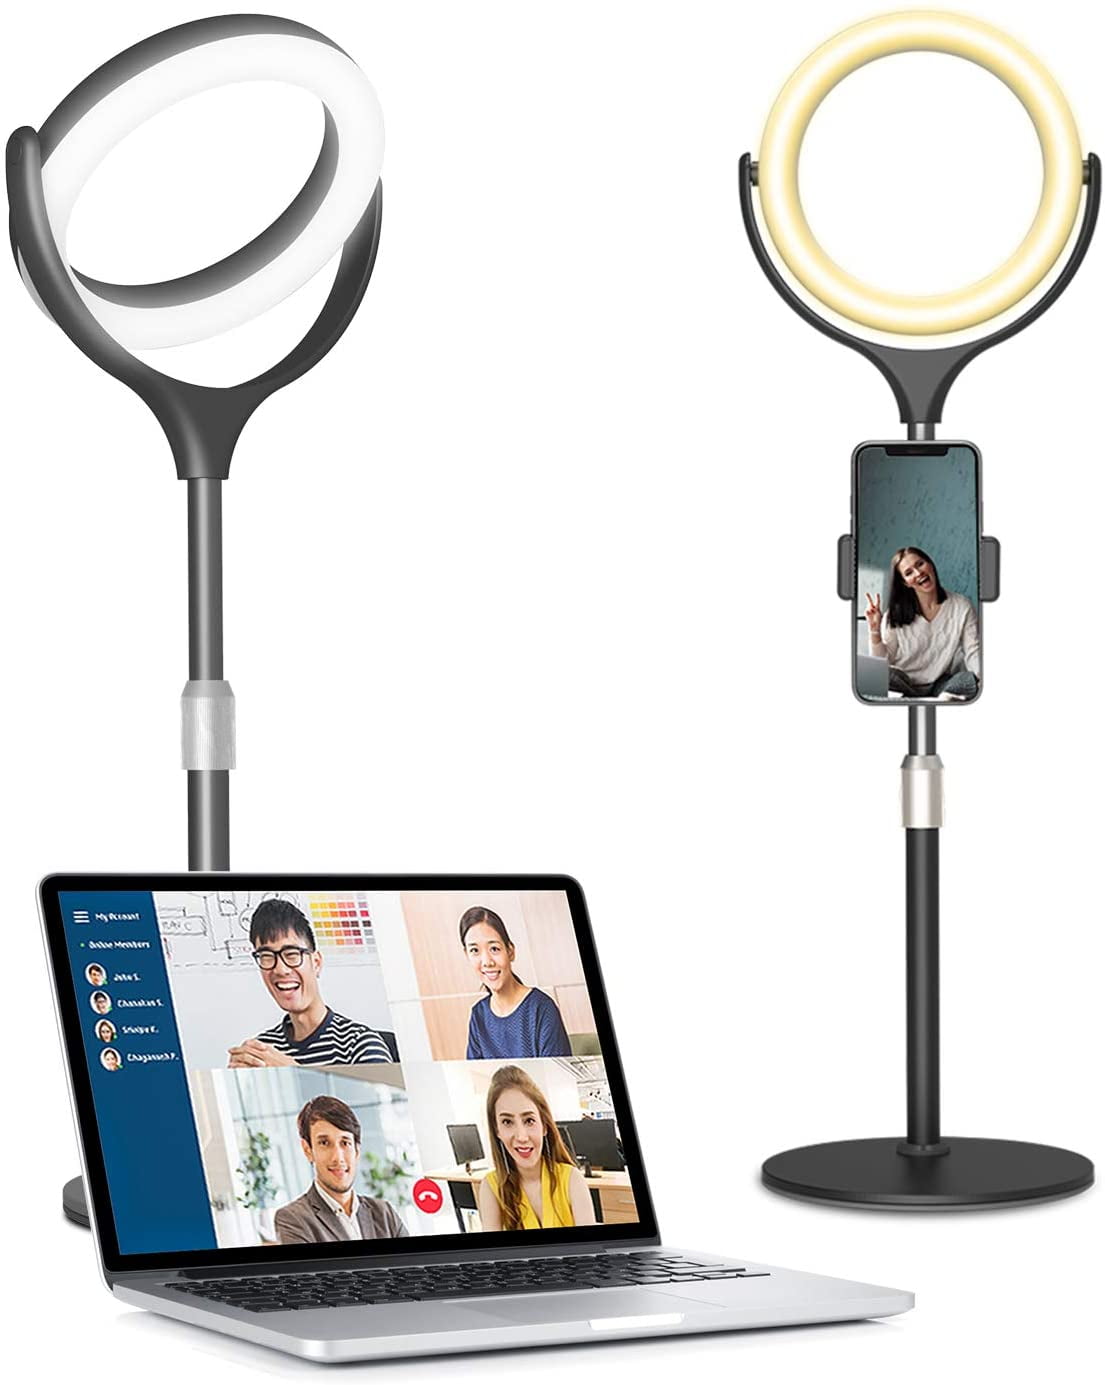 Round Shape Video Conference Lighting Kit,Zoom Lighting for Computer,Webcam Light for Laptop with Stand Tripod and Clamp Mount,Never Fall Off 